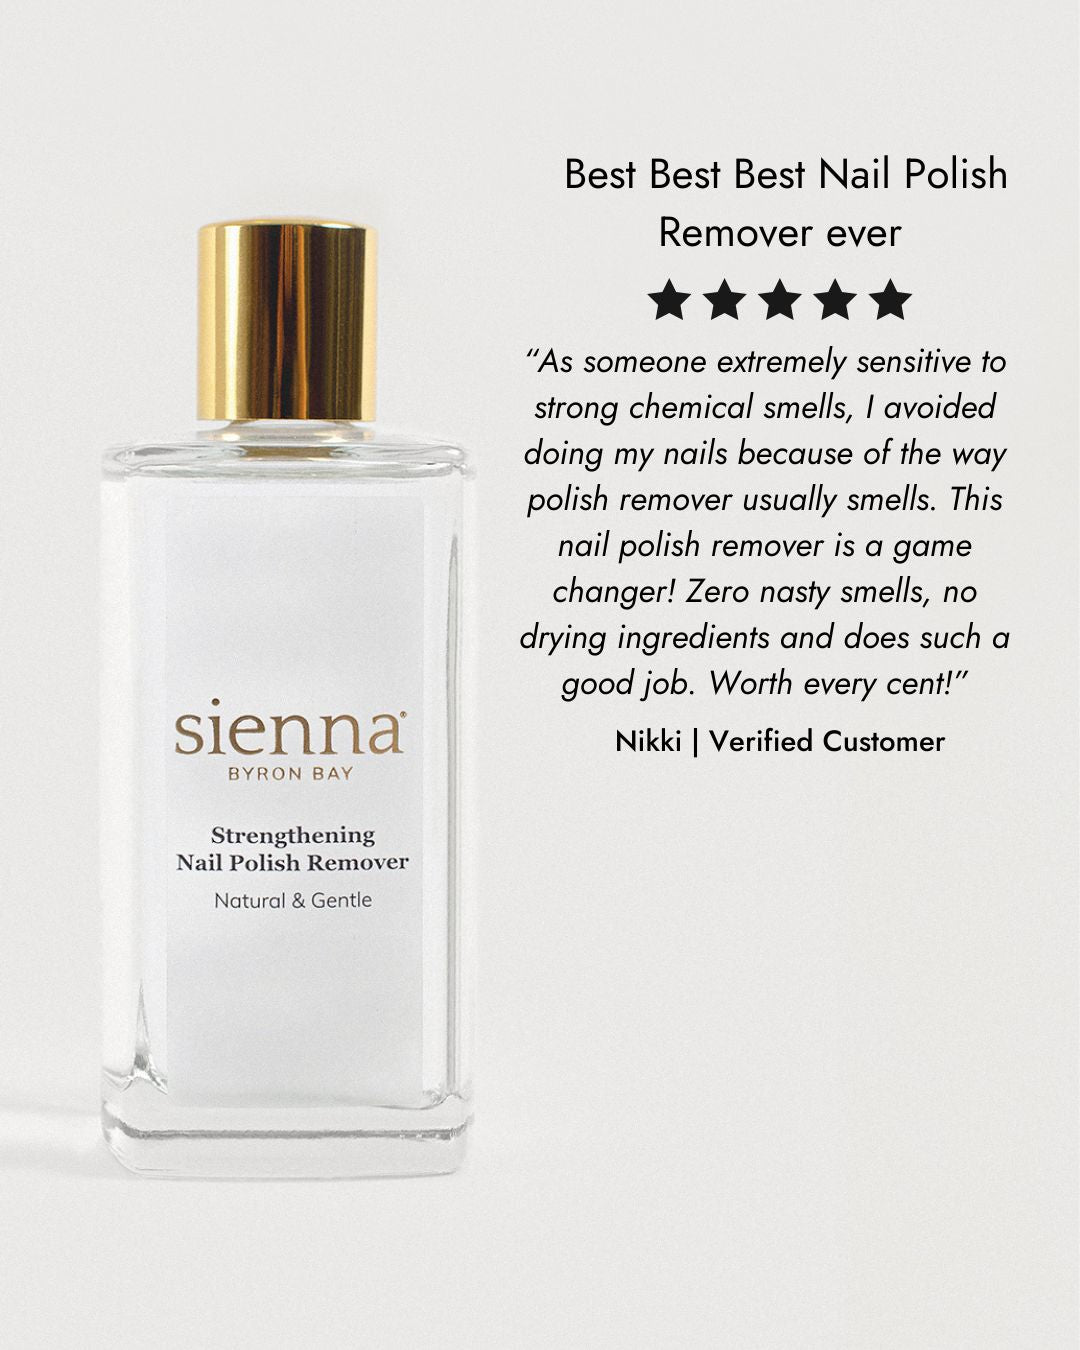 Strengthening nail polish remover 5 star review